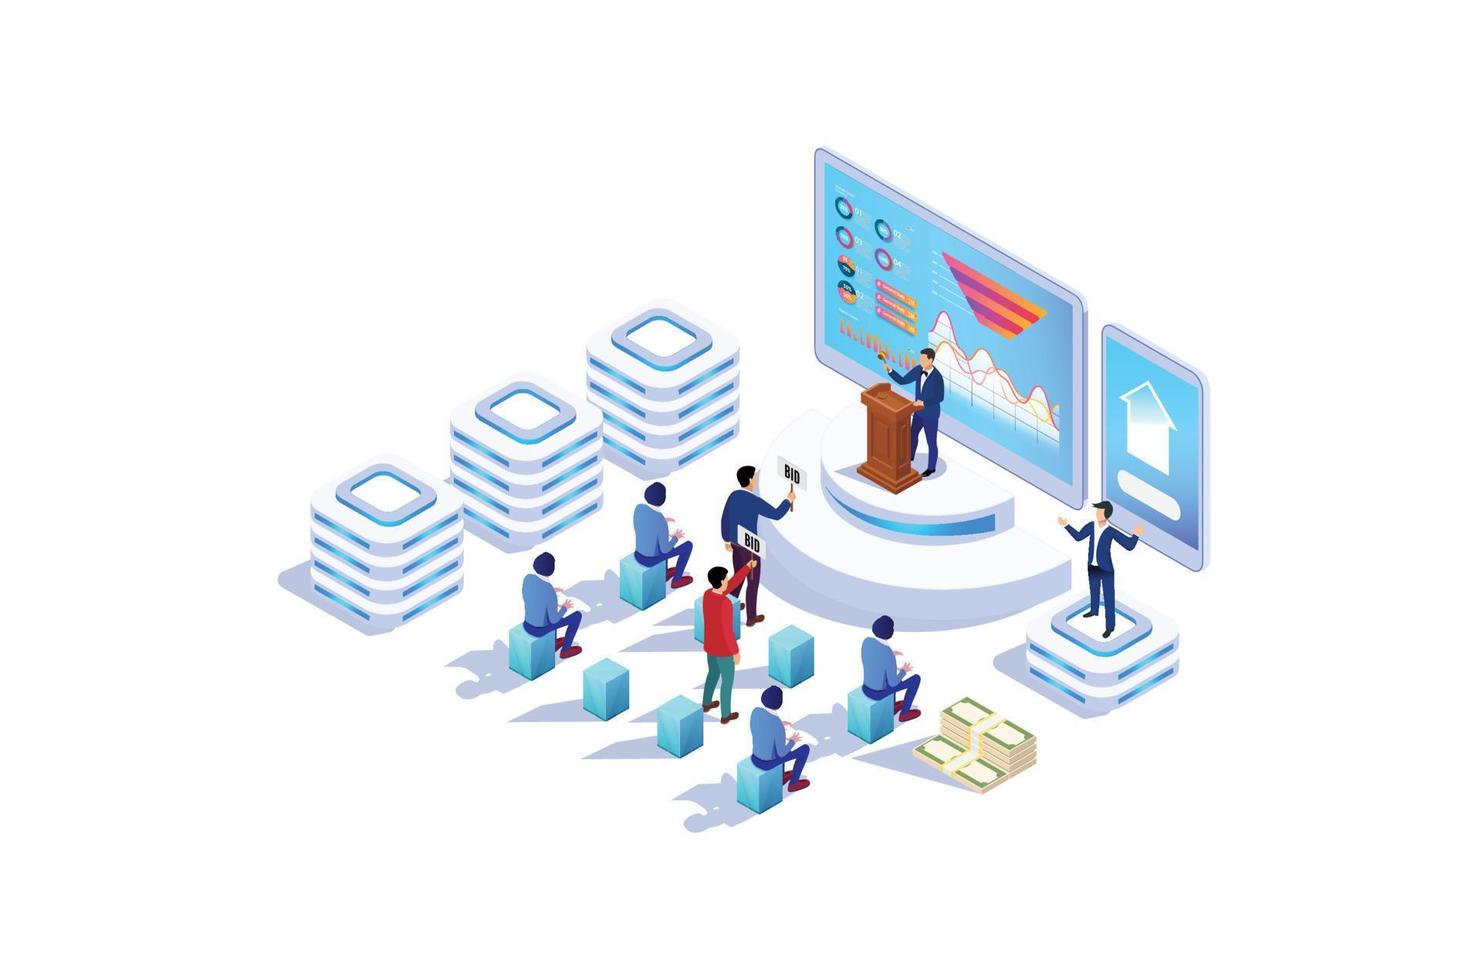 Isometric Online Auction Illustration, Web Banners, Suitable for Diagrams, Infographics, Book Illustration, Game Asset, And Other Graphic Related Assets vector